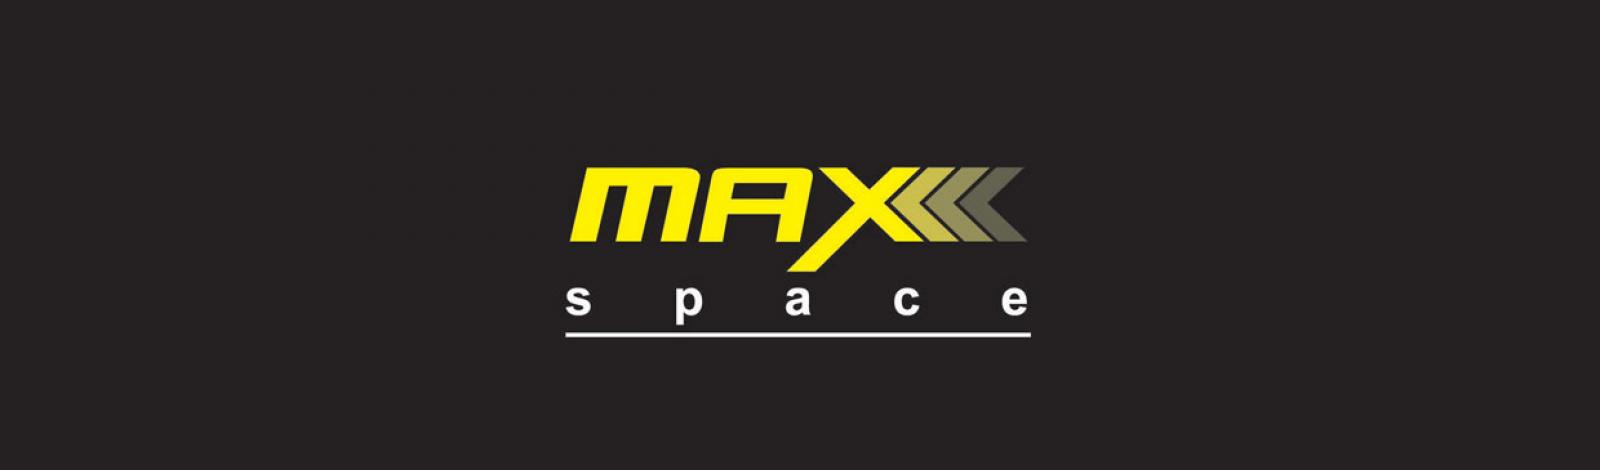 Max Building Technologies Limited banner